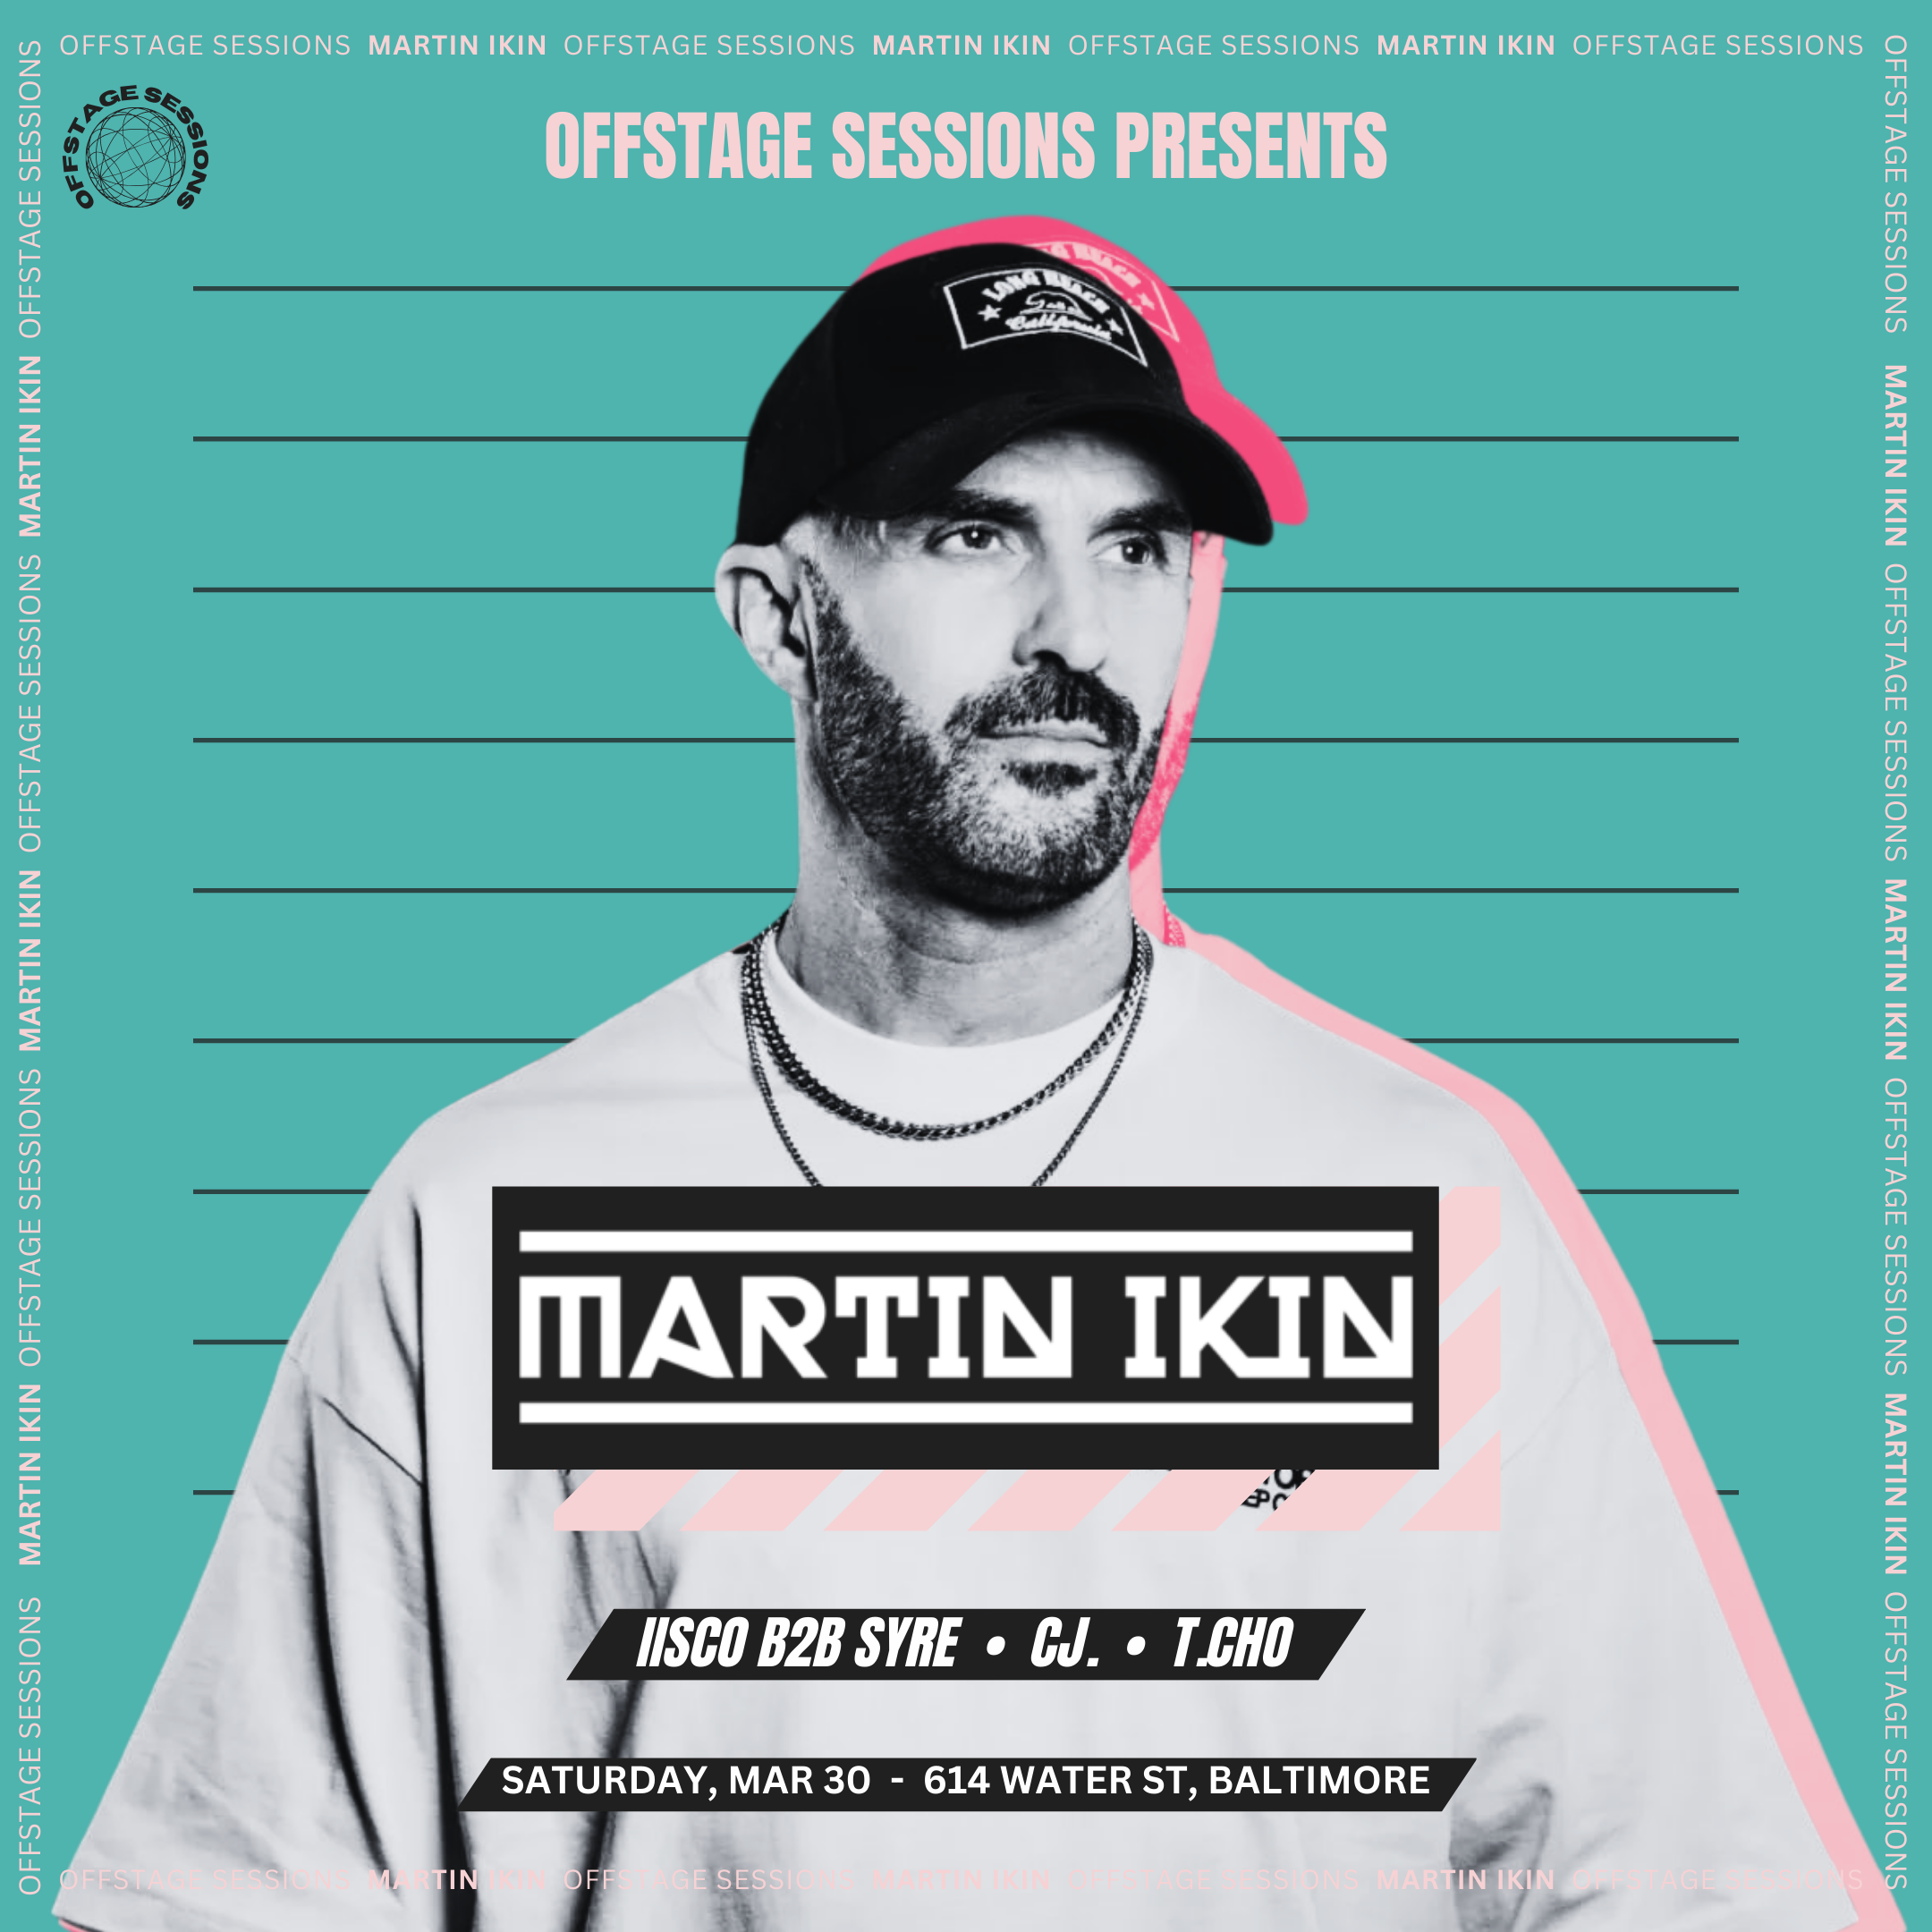 Offstage Sessions presents: Martin Ikin - フライヤー表